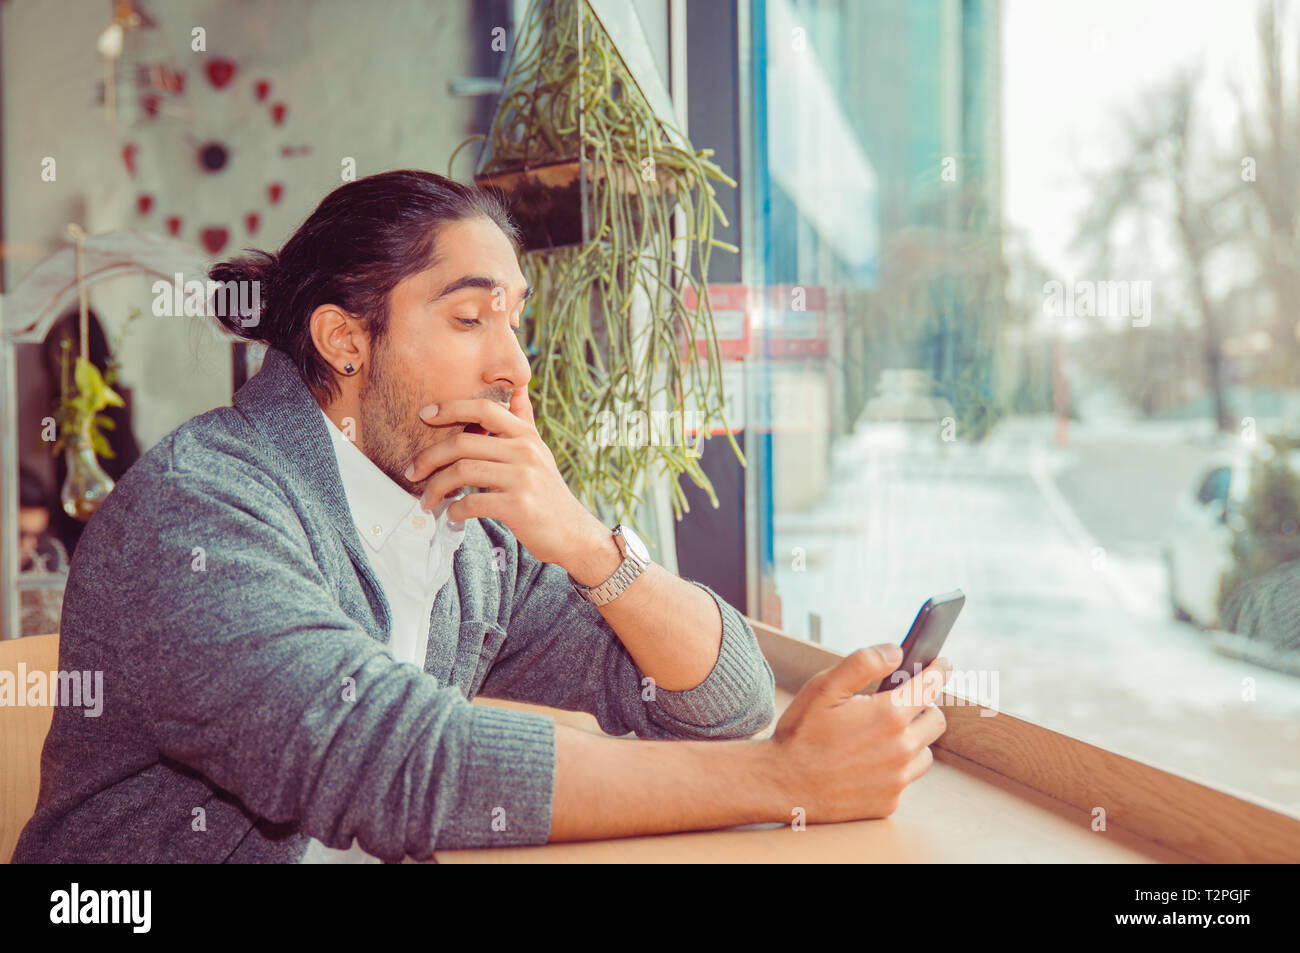 sleepy funny man, hand on mouth yawning looking at smart phone being bored by phone conversation, texting. Closeup portrait of a guy wearing casual we Stock Photo